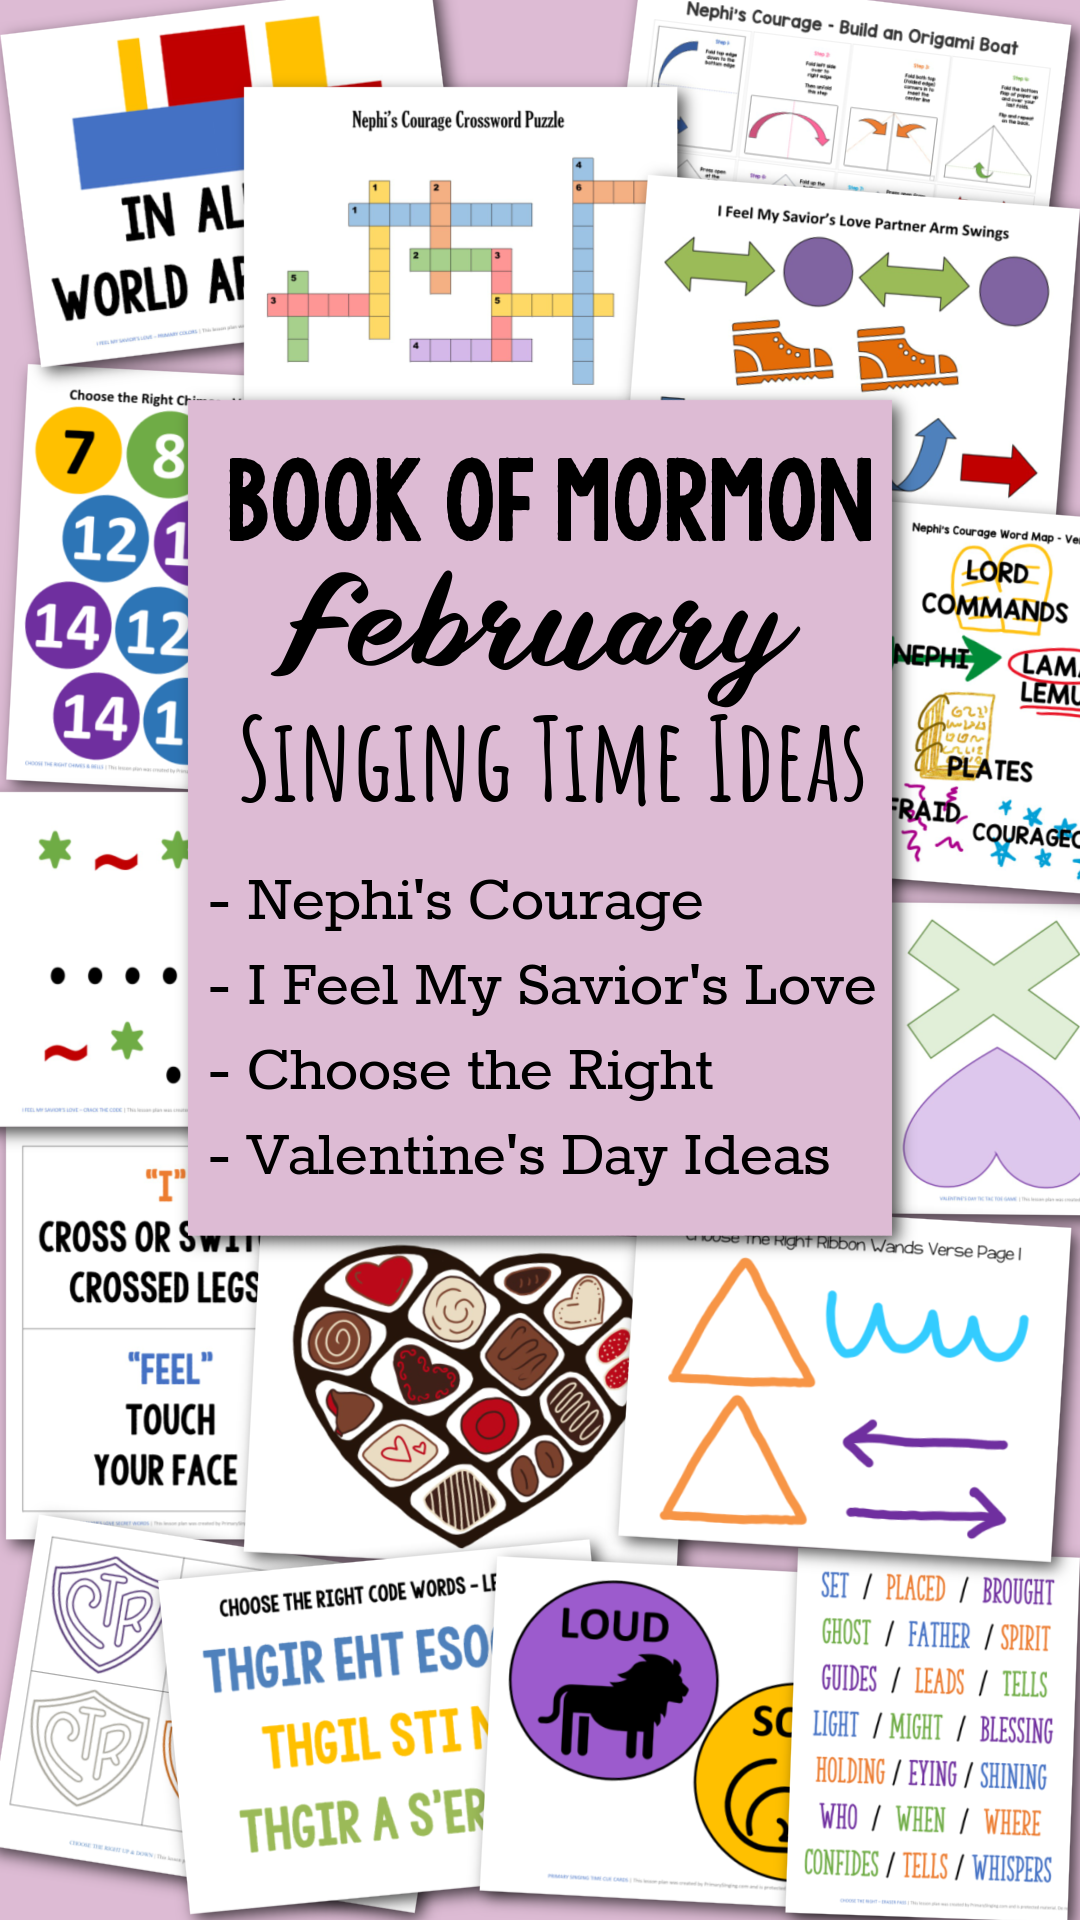 Book of Mormon February Primary Songs Singing Time ideas to help you teach Nephi's Courage, I Feel My Savior's Love, and Choose the Right. Plus, fun activities and ideas for the Valentine's Day! This packet is jam packed full with lesson plans and printable song helps for LDS Primary music leaders and great for home Come Follow Me use for families, too.